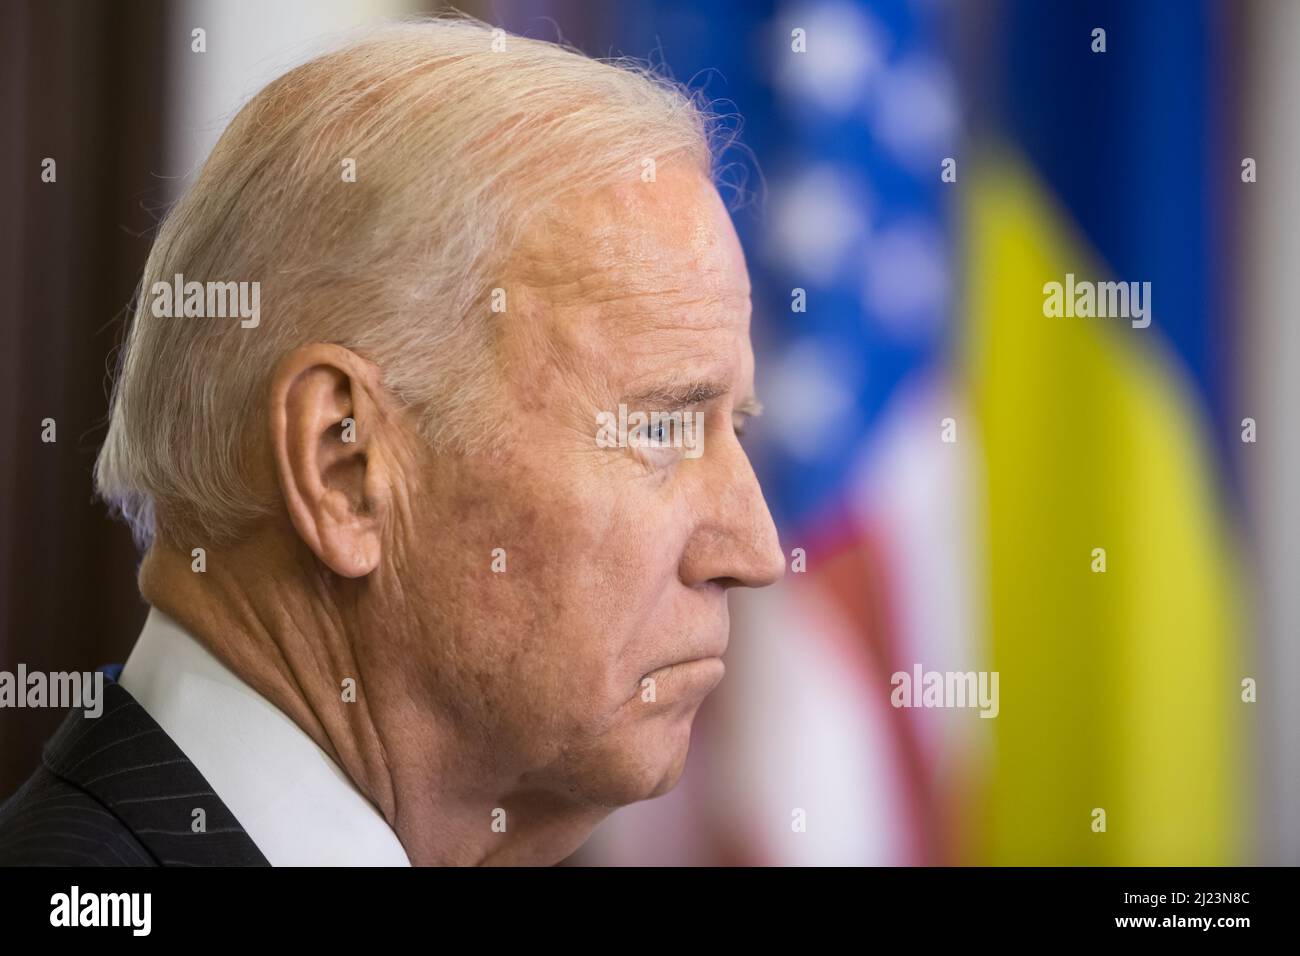 United States Vice President Joe Biden during an official visit to Ukraine in December 2014. President Joe Biden delivered a forceful and highly personal condemnation of Russia’s Vladimir Putin, summoning a call for liberal democracy and a durable resolve among Western nations in the face of a brutal autocrat. Stock Photo